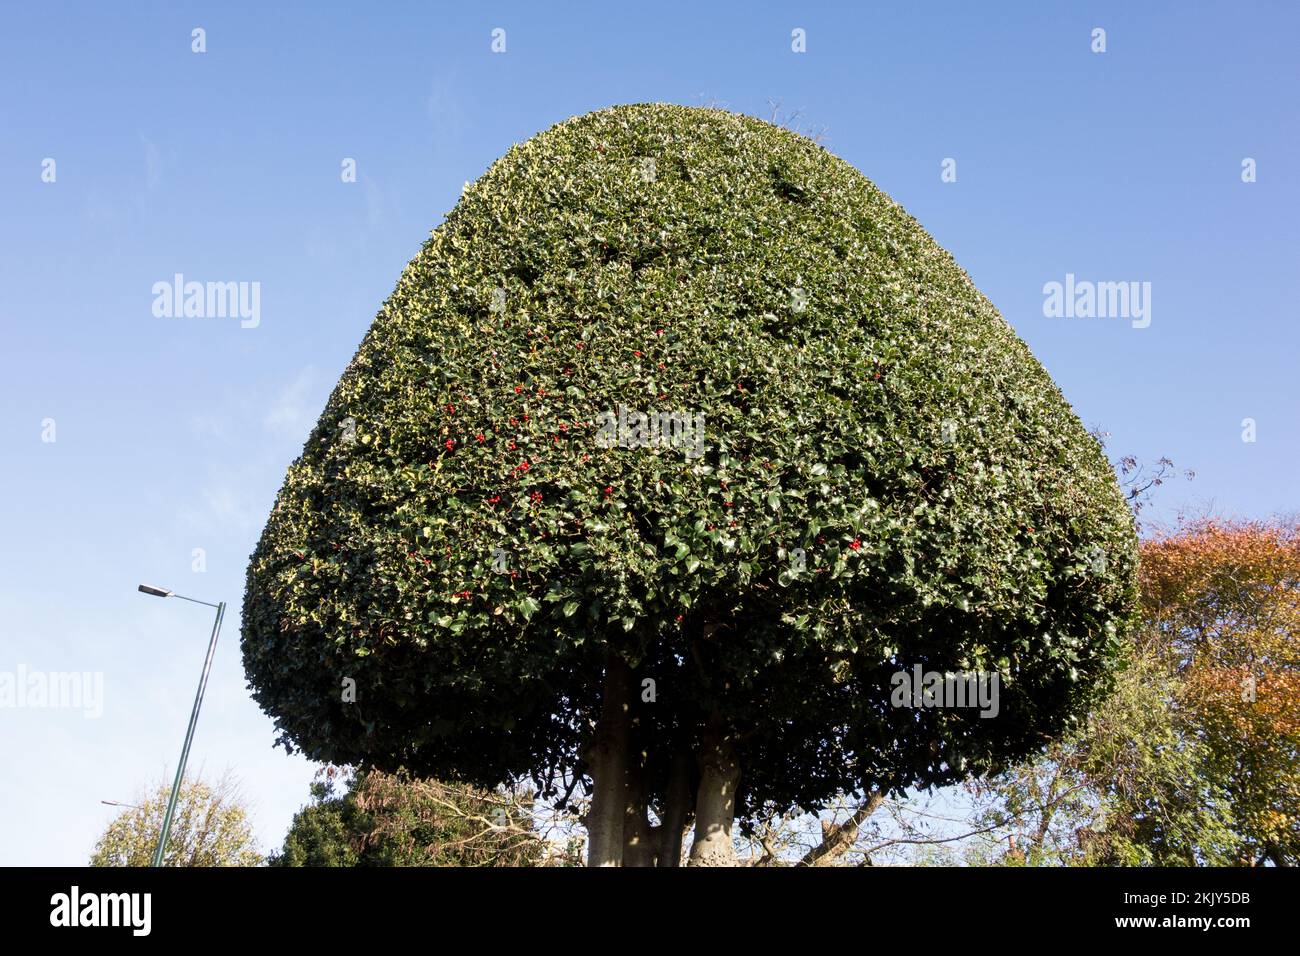 A display of Yew Tree (Taxus baccata) topiary in a garden in England, UK Stock Photo